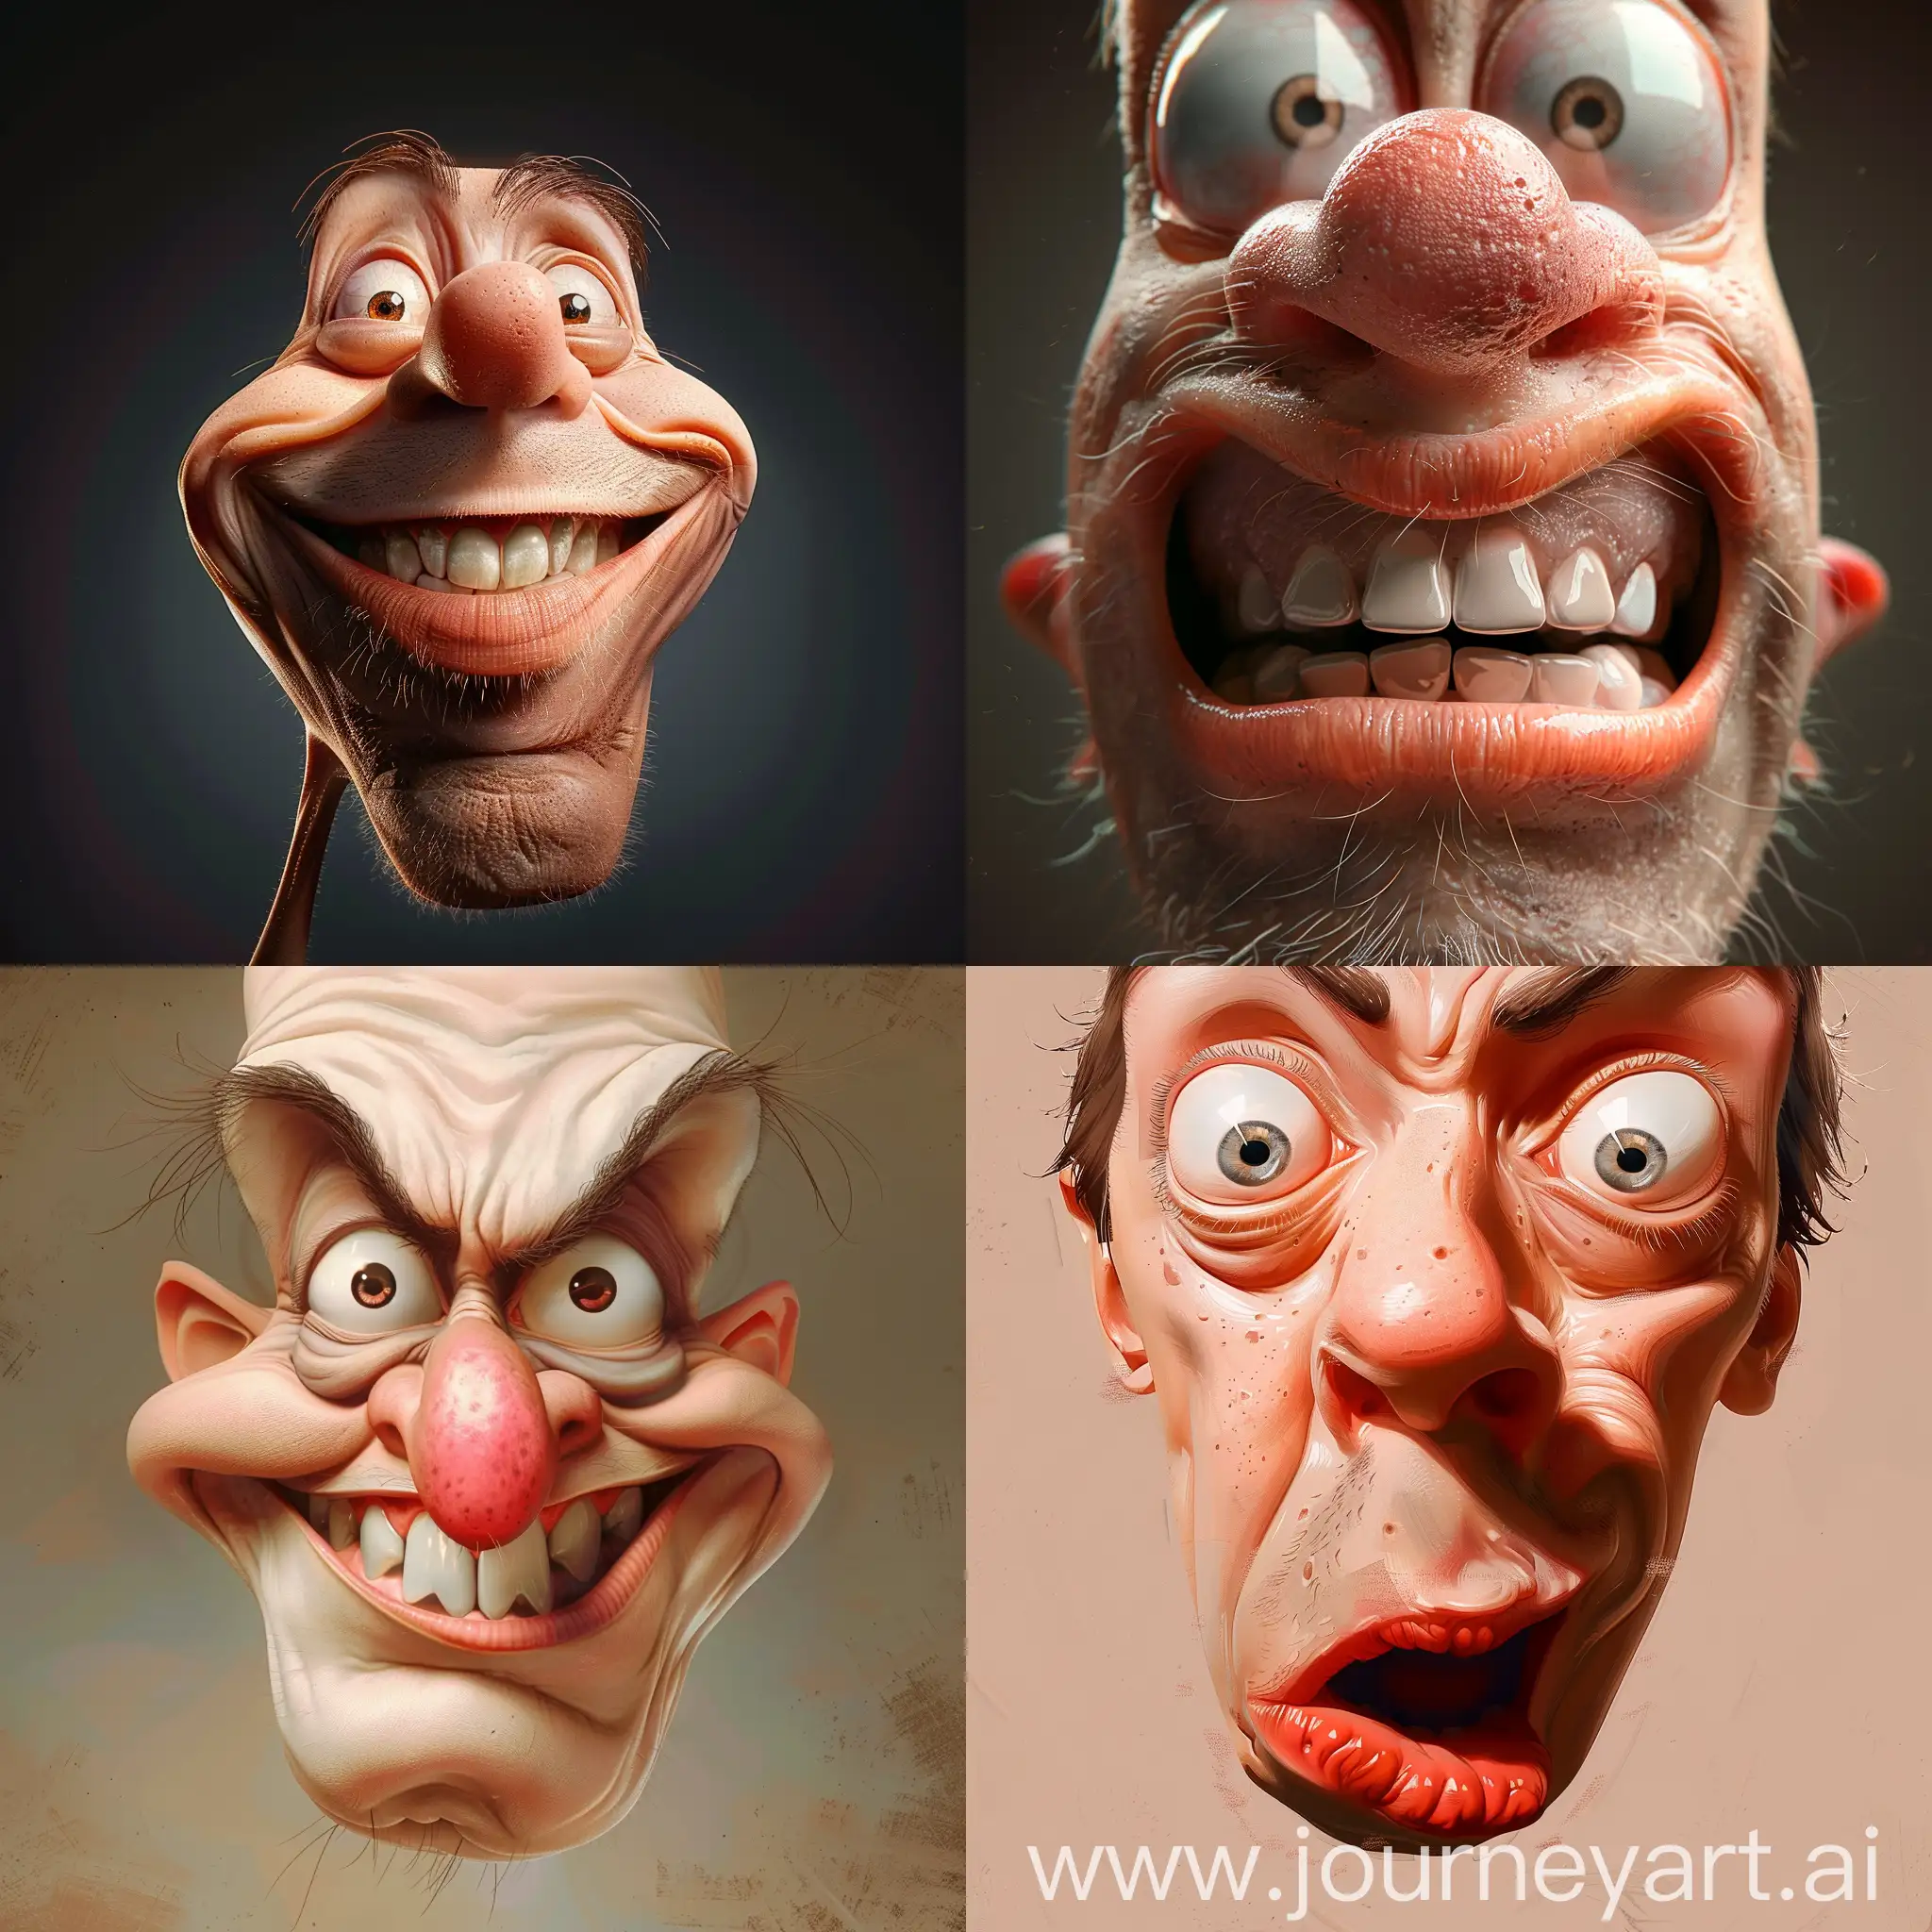 Humorous-Photorealistic-Image-of-a-Playful-Face